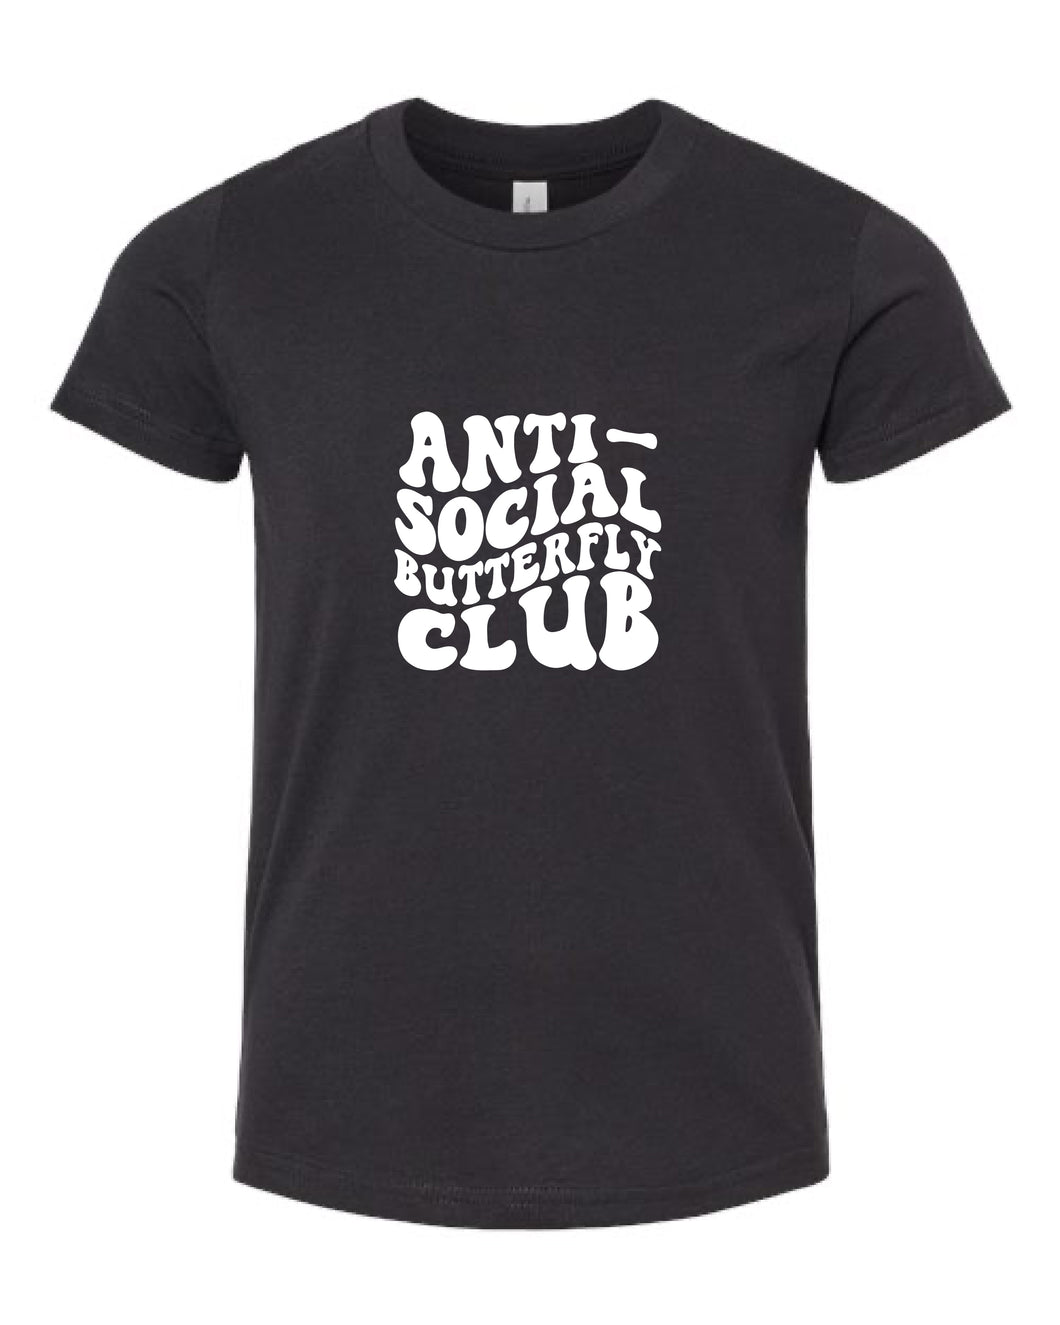 Anti Social Butterfly Club YOUTH Tee New